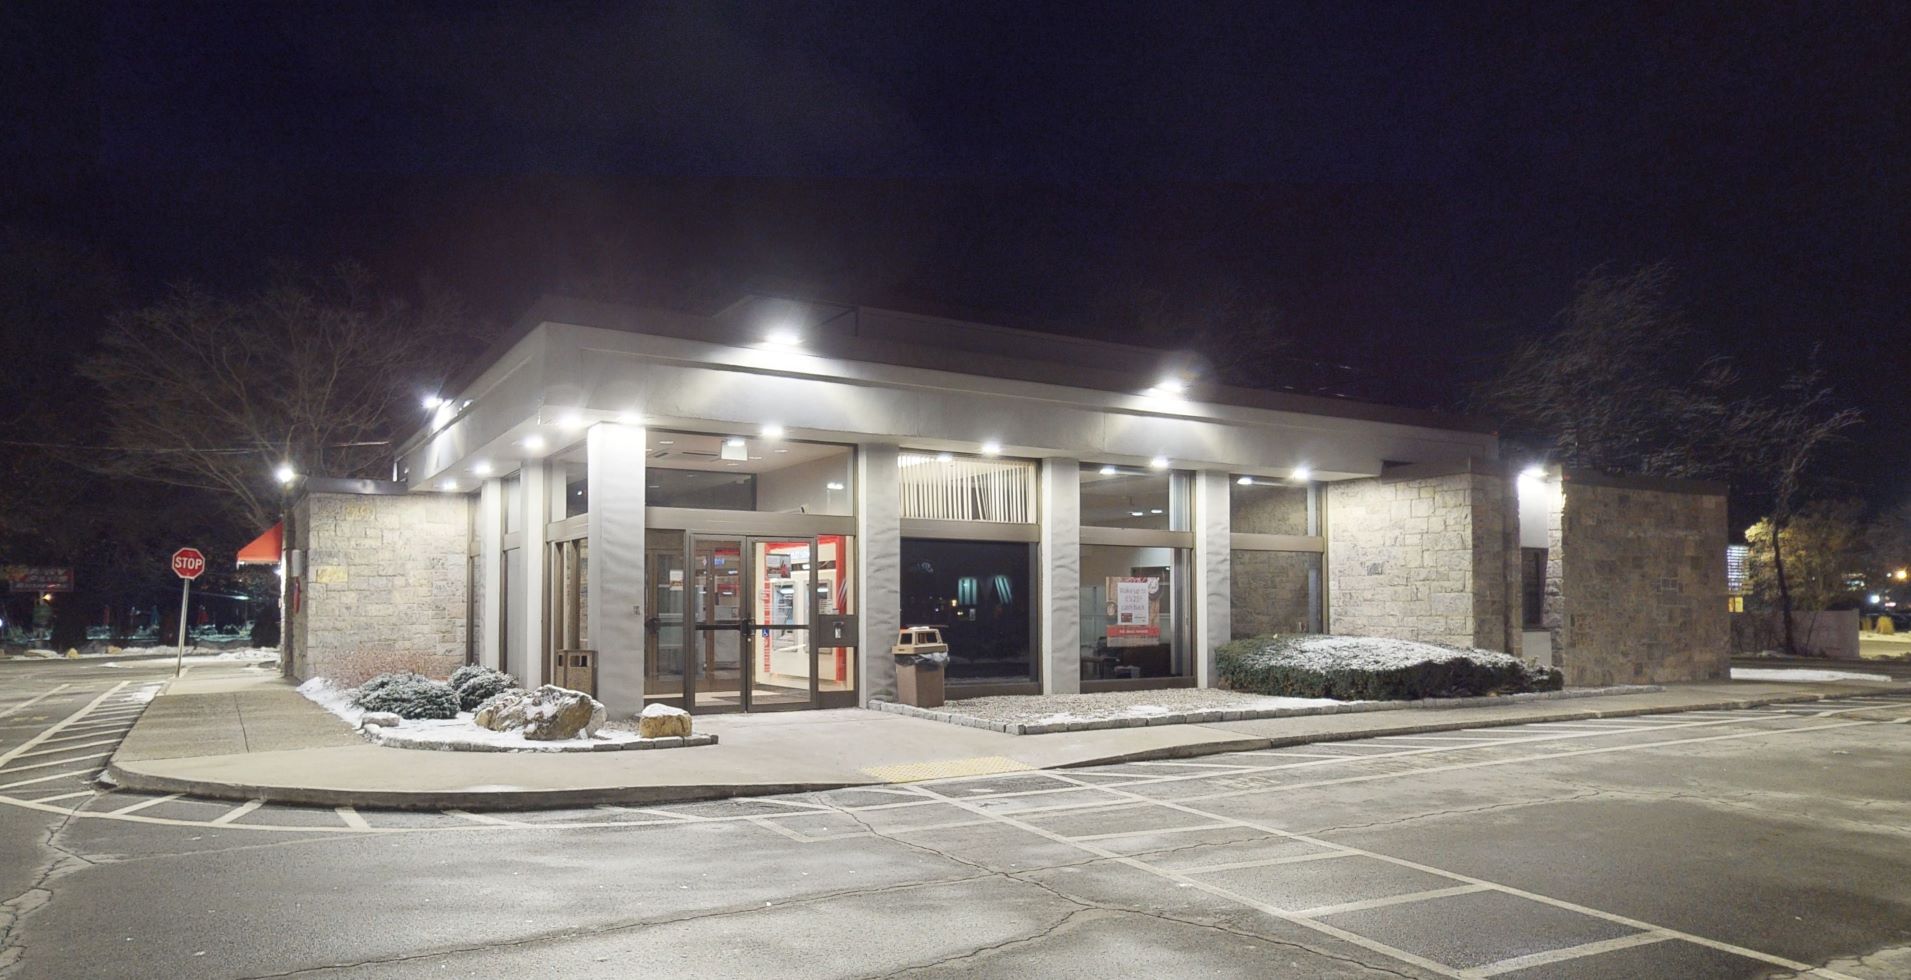 Bank of America financial center with drive-thru ATM | 1414 Route 300, Newburgh, NY 12550